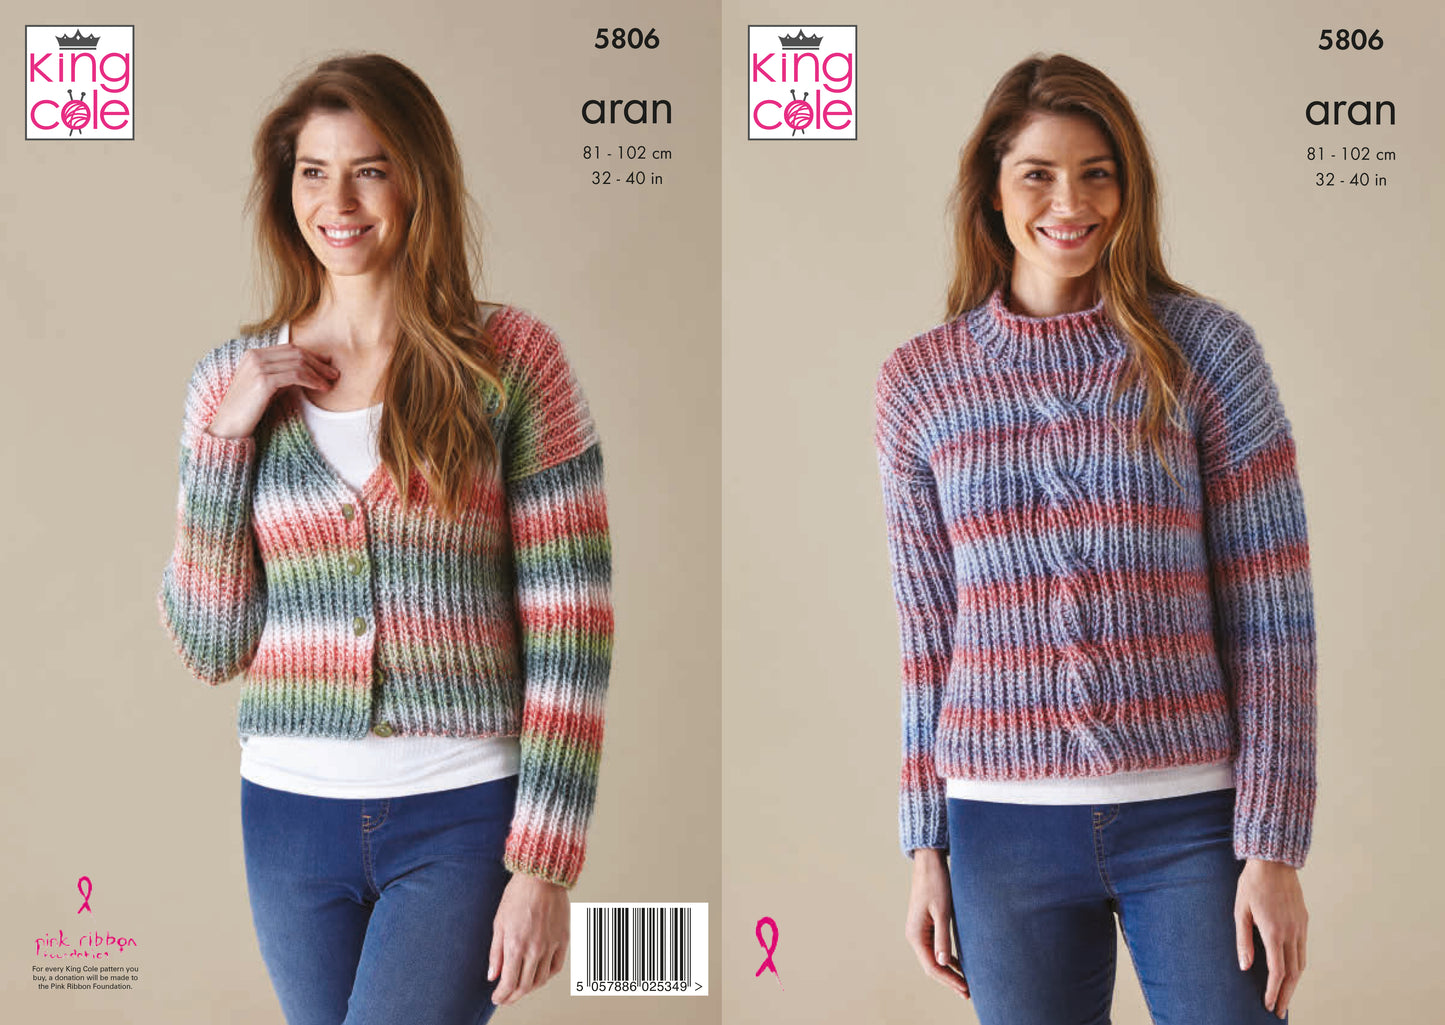 King Cole Acorn Pattern 5806 - Sweater and Cardigan